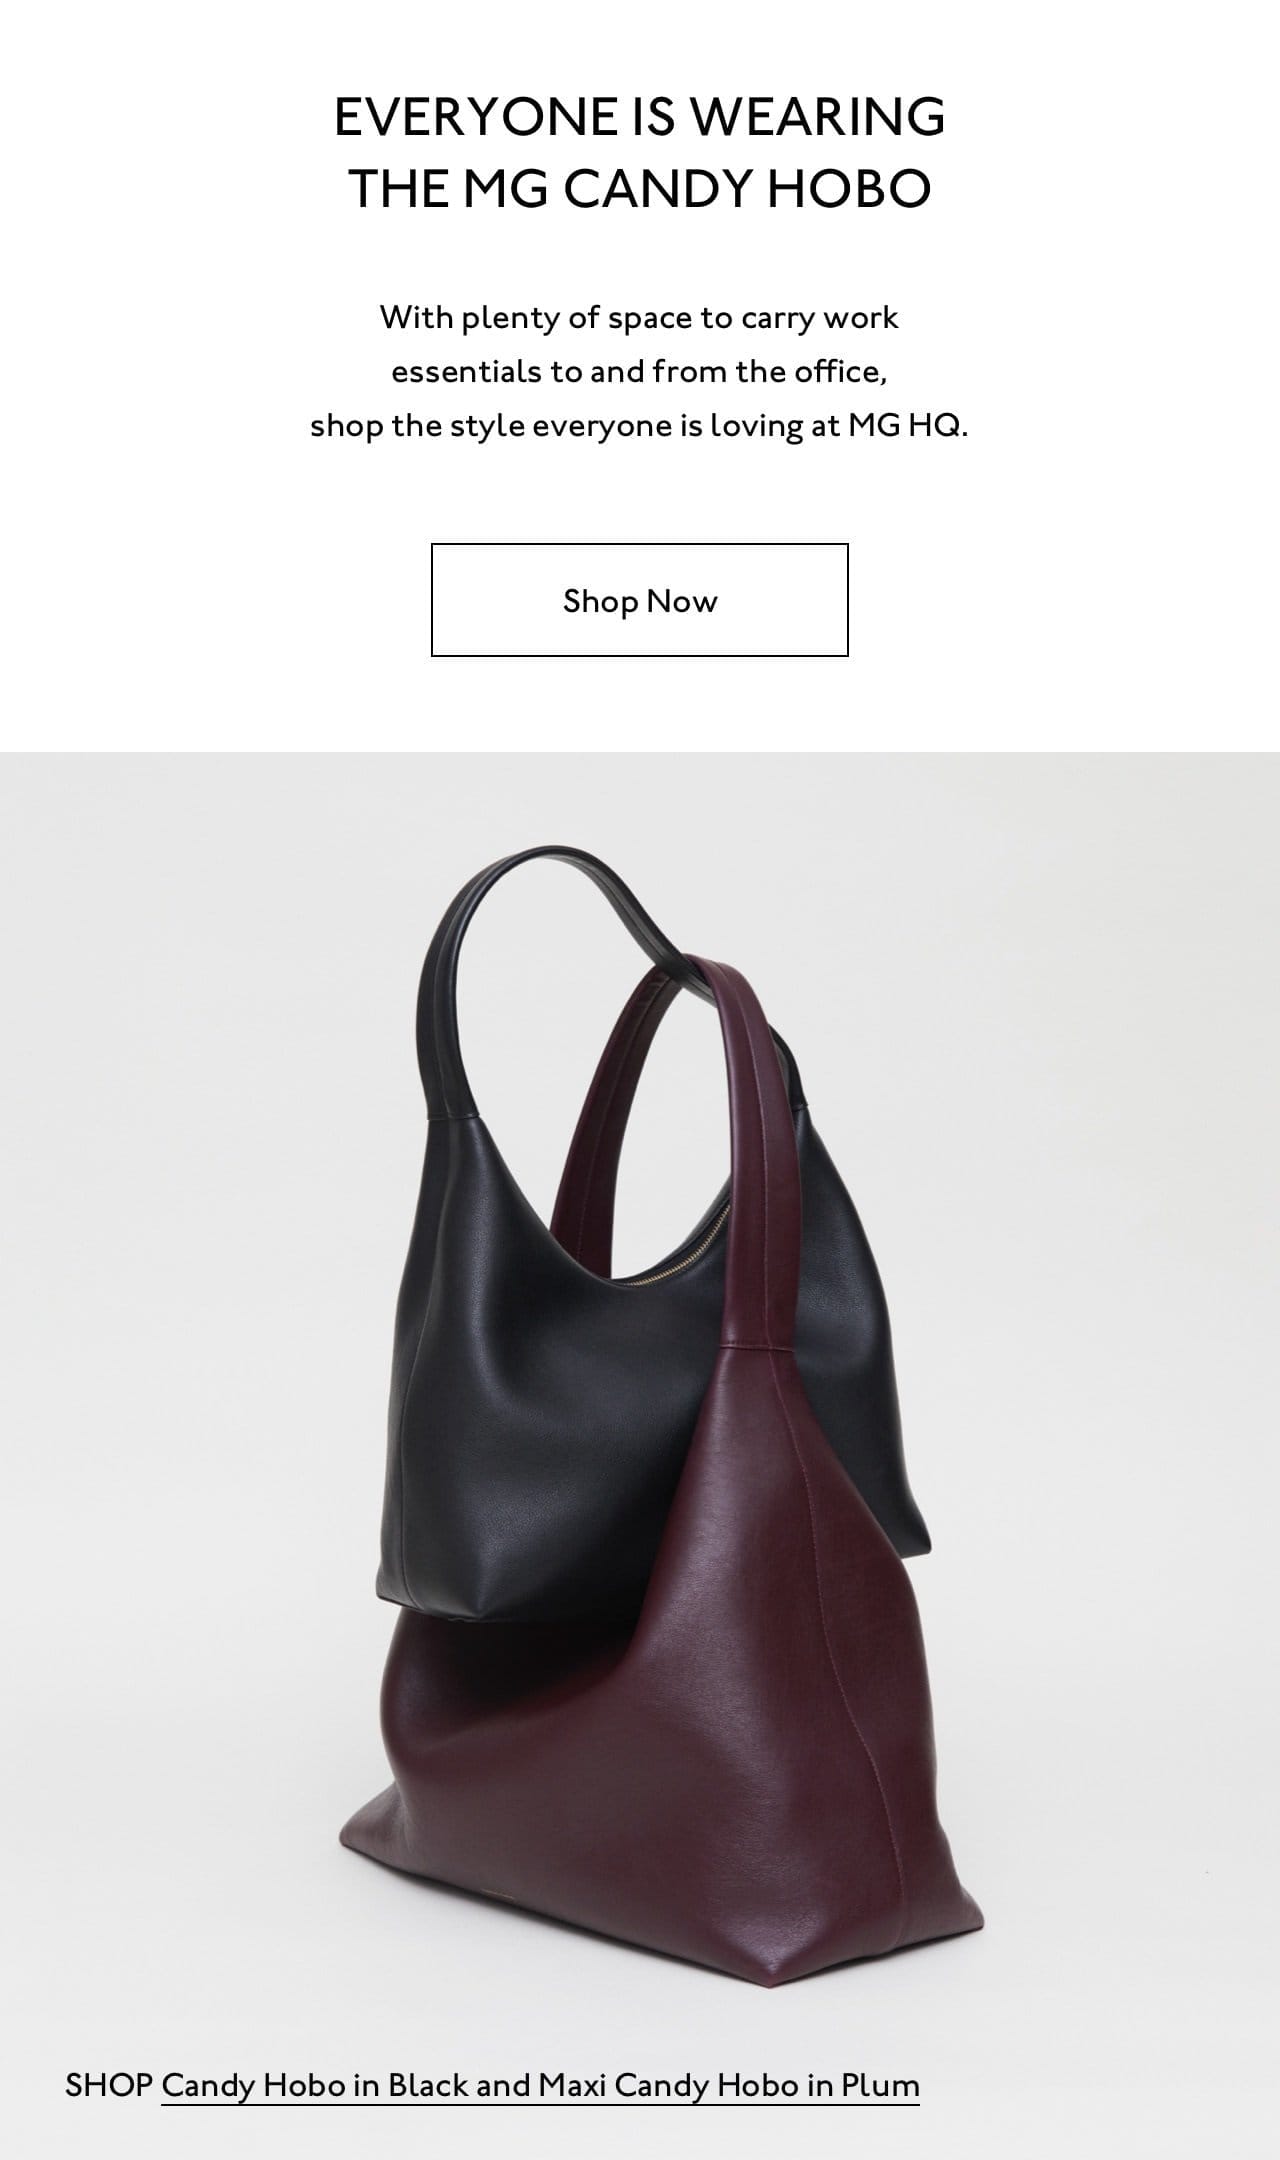 With plenty of space to carry work essentials to and from the office, shop the style everyone is loving at MG HQ. Shop Candy Hobo in Black and Maxi Candy Hobo in Plum.